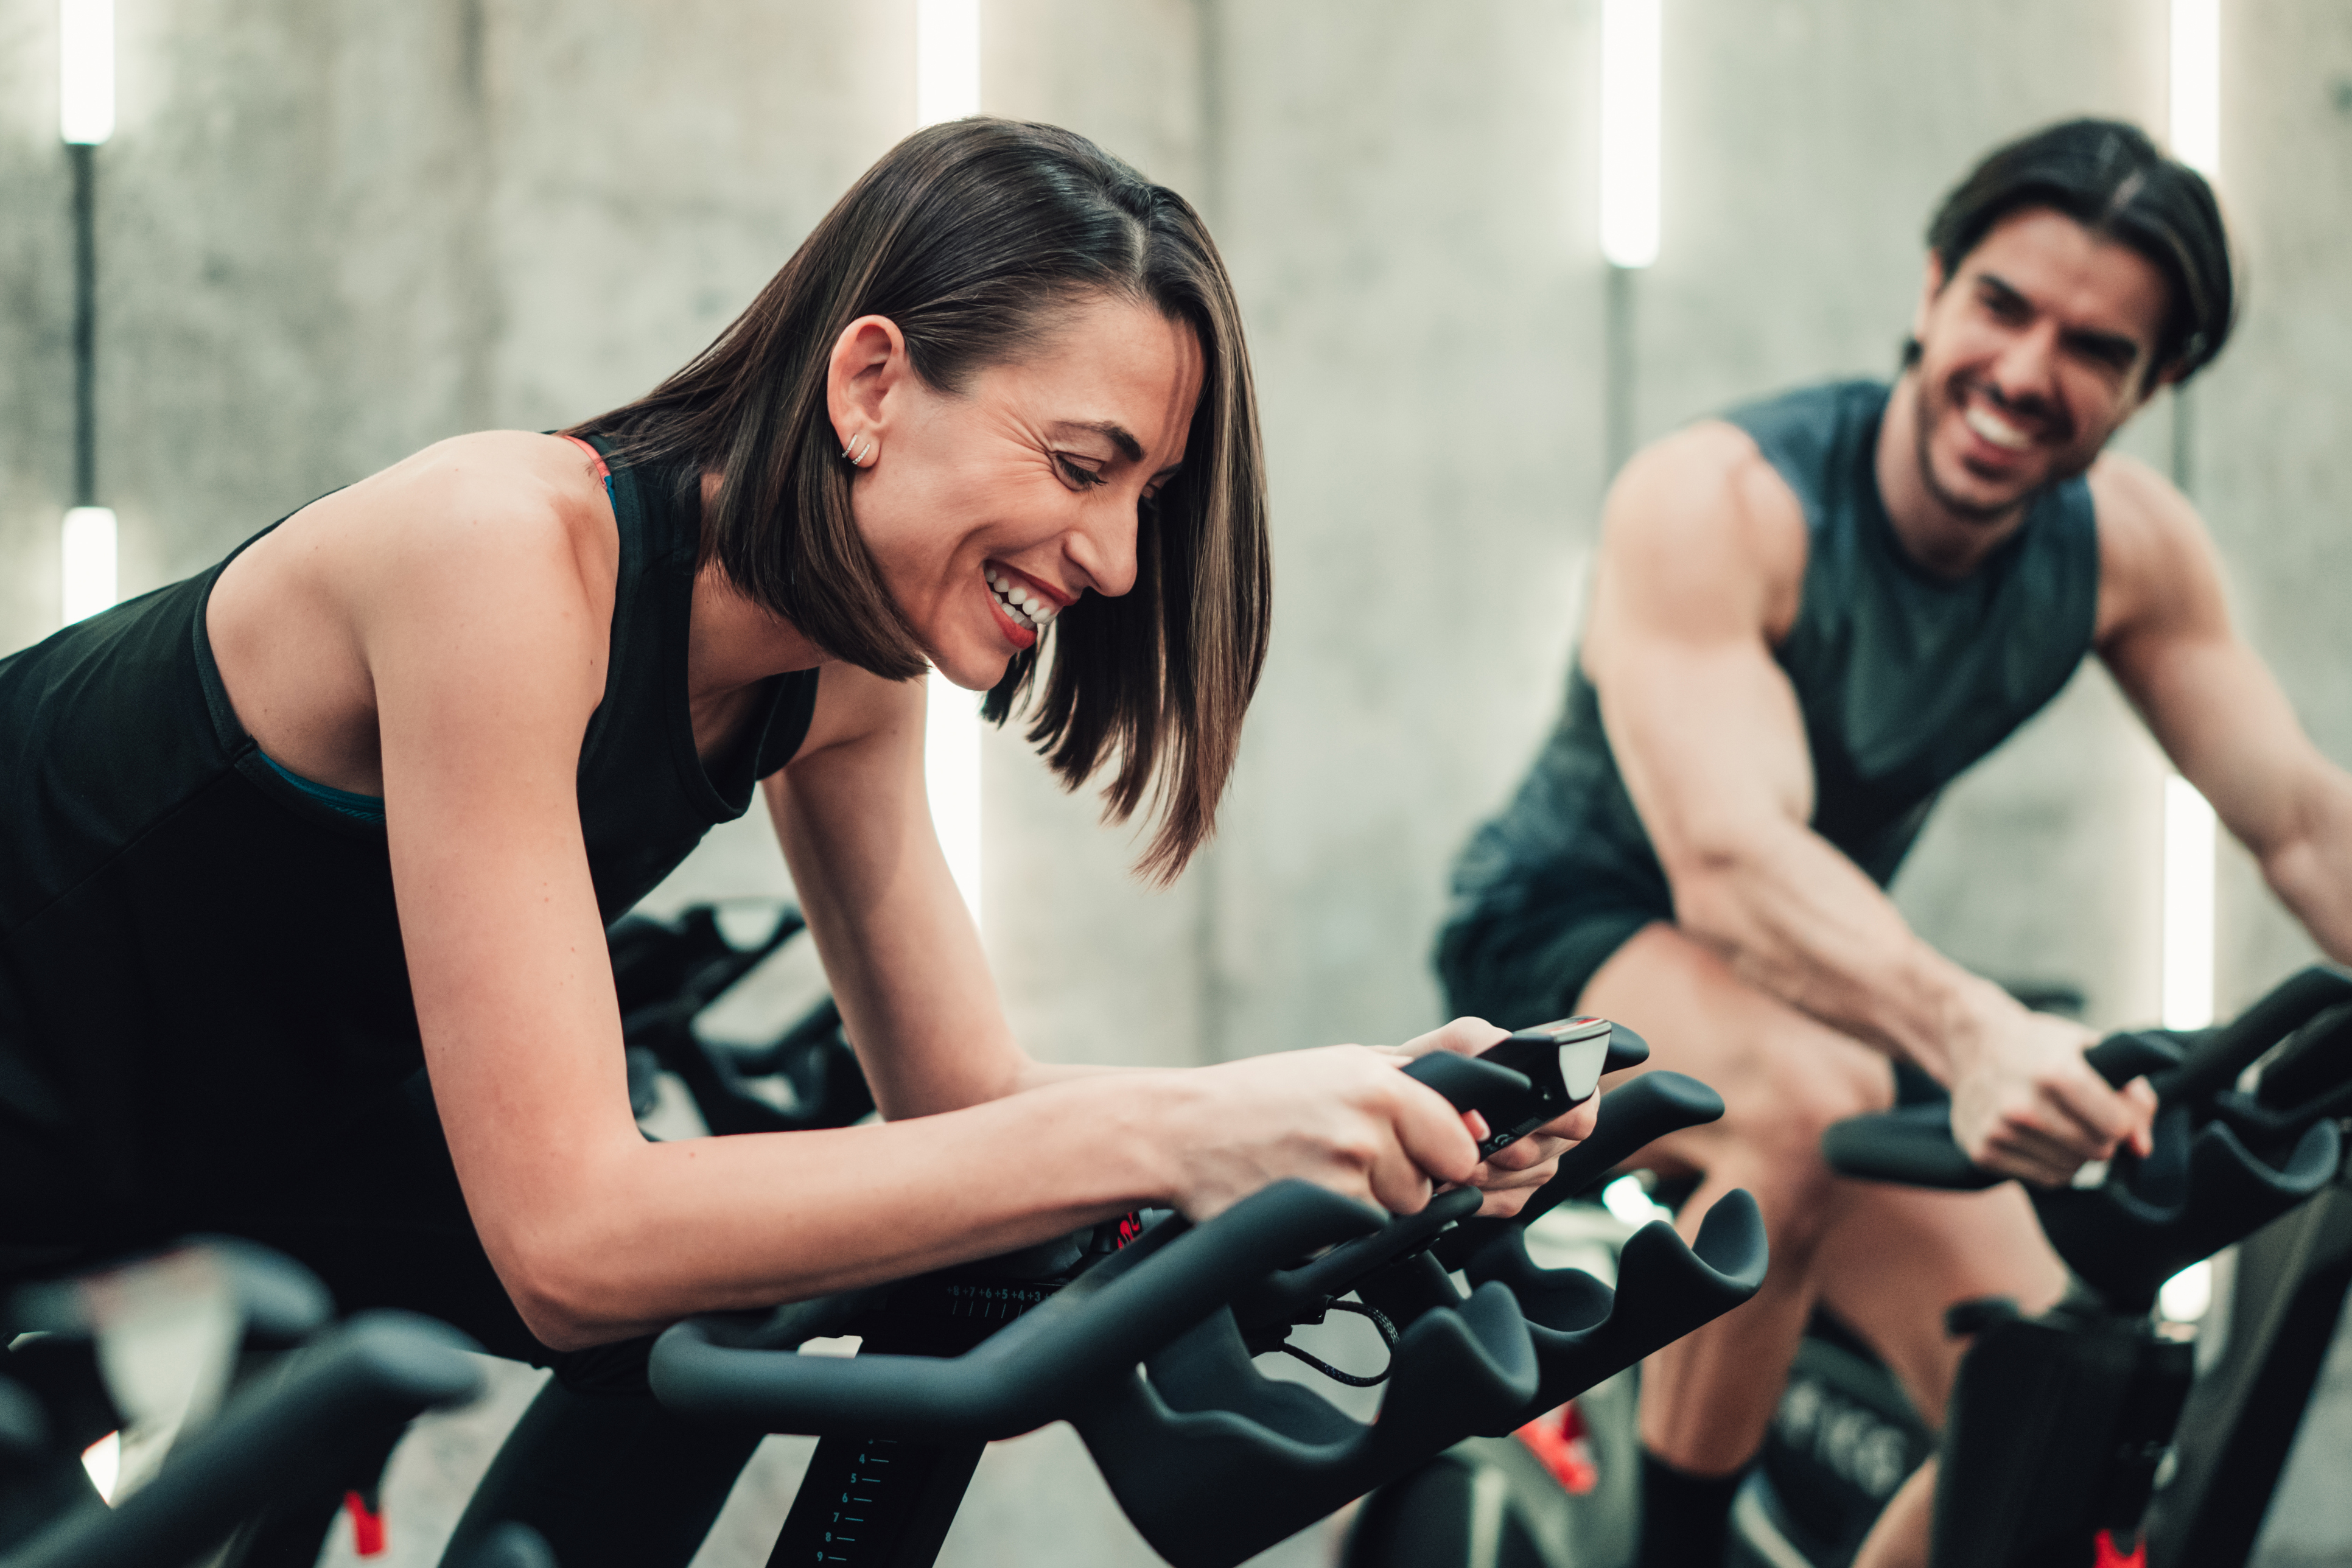 Is The Gym Where Guys Go To Pick Up Women With The Intent Of Dating Them?